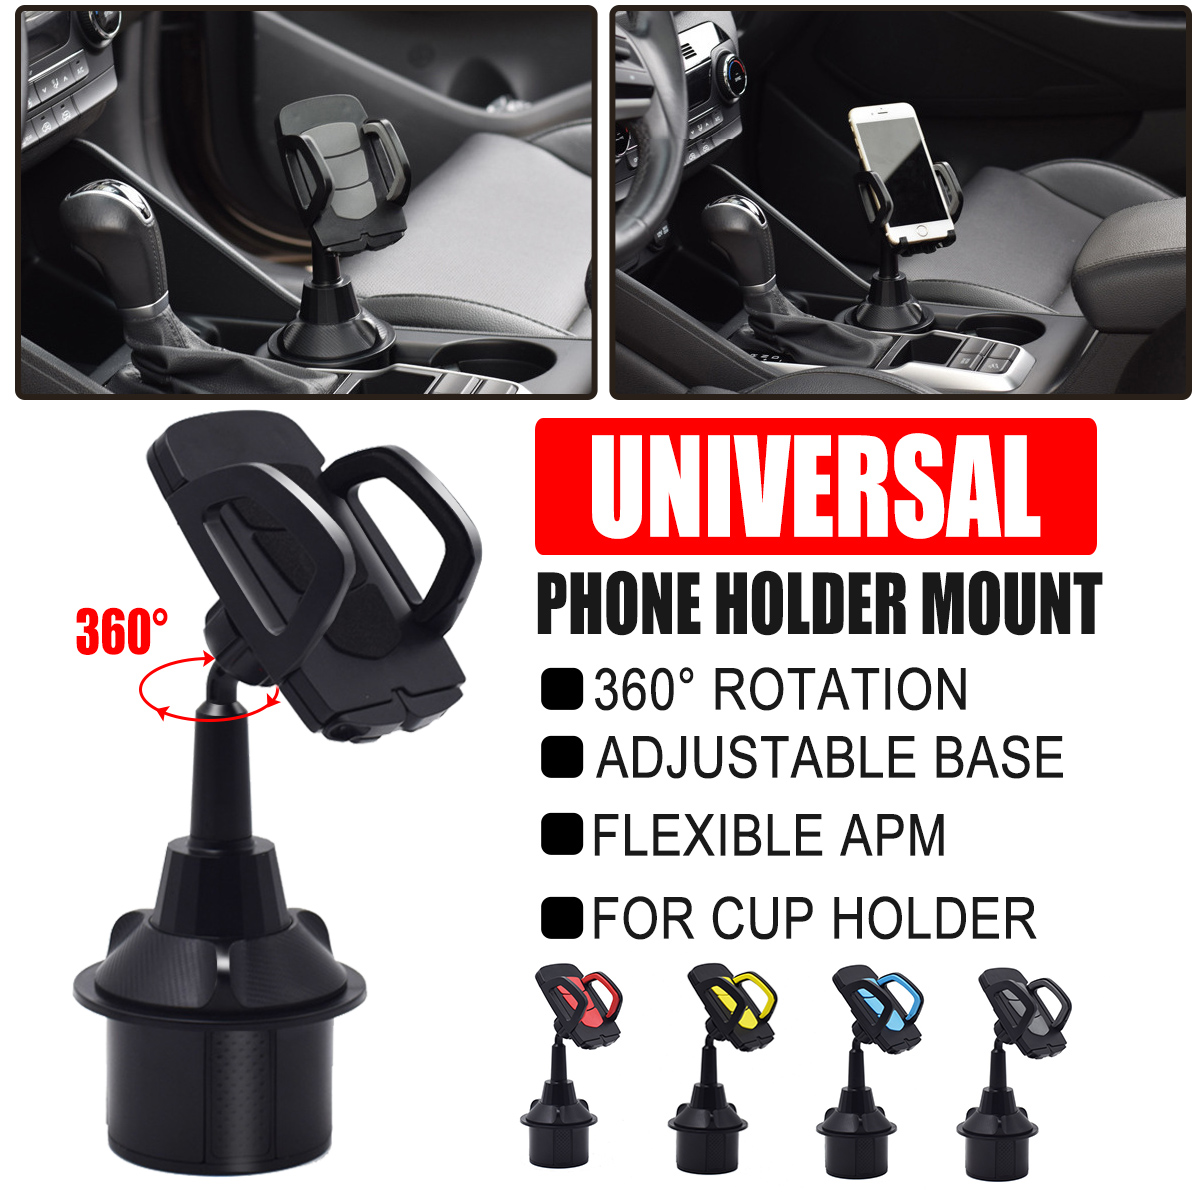 Universal-360-Rotation-Car-Phone-Mount-Gooseneck-Cup-Holder-for-5-95cm-Width-Cell-Phone-for-iPhone-1-1720314-1